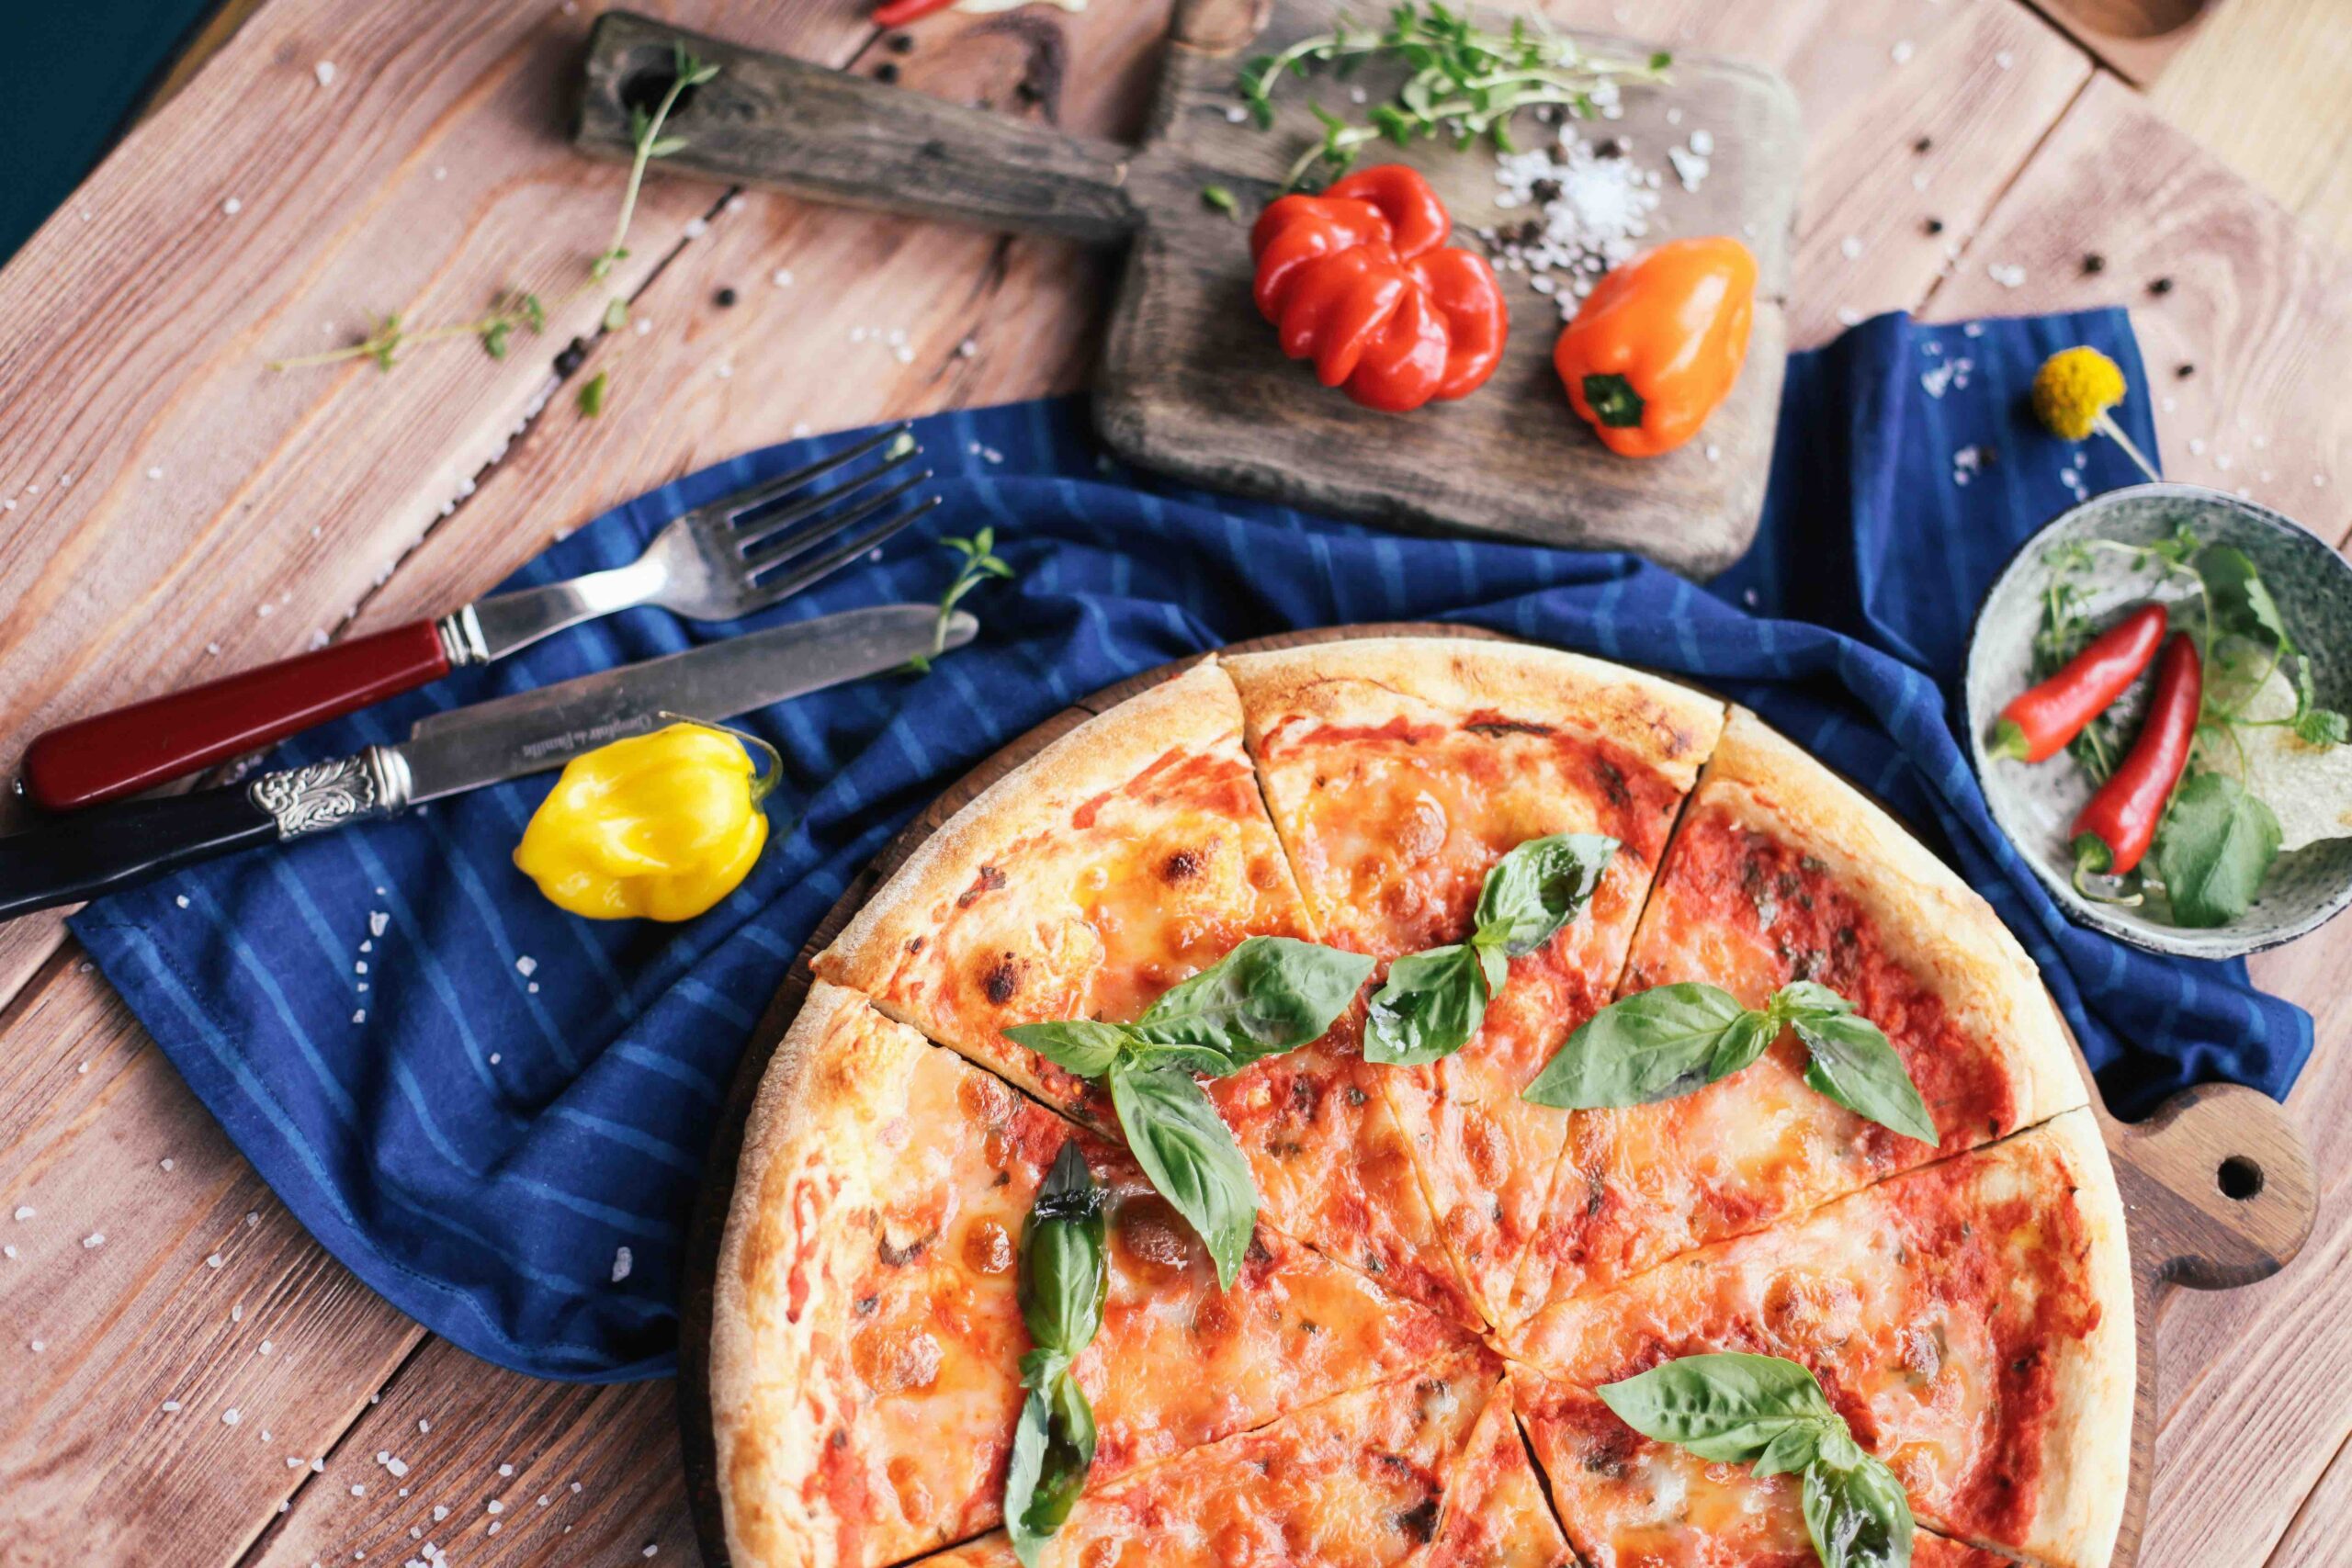 The Pizza Garden and Other Food-y Ideas for Kids